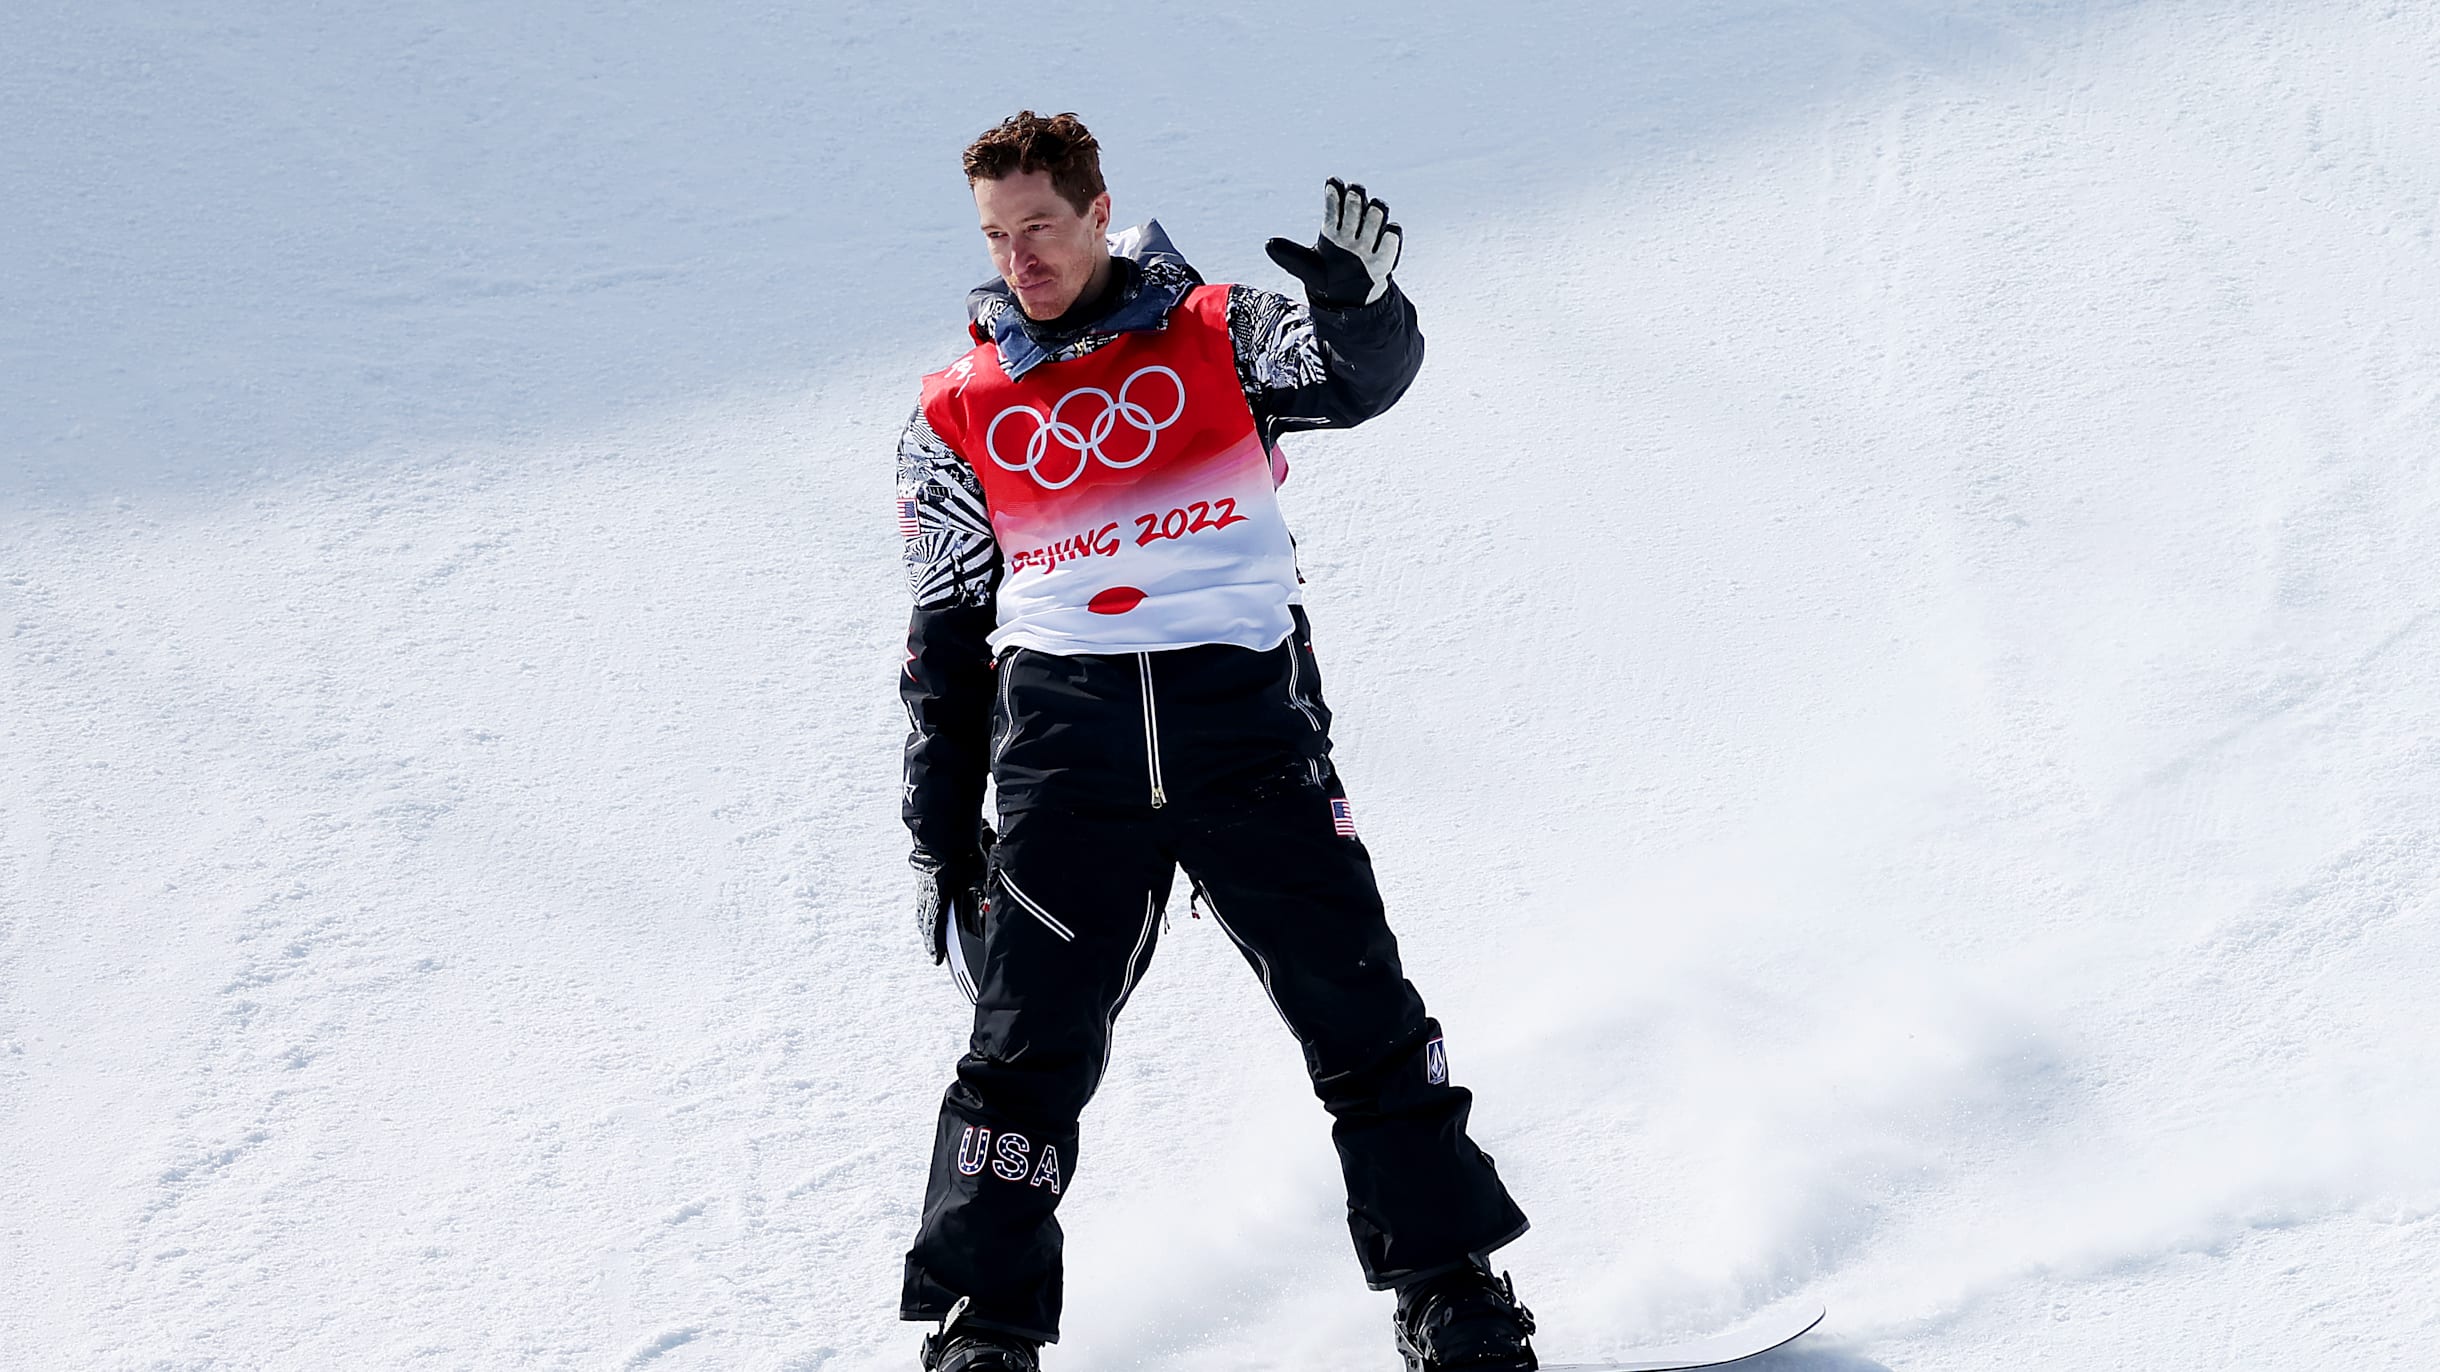 Shaun White: It's done and I'm so relieved as stellar snowboard